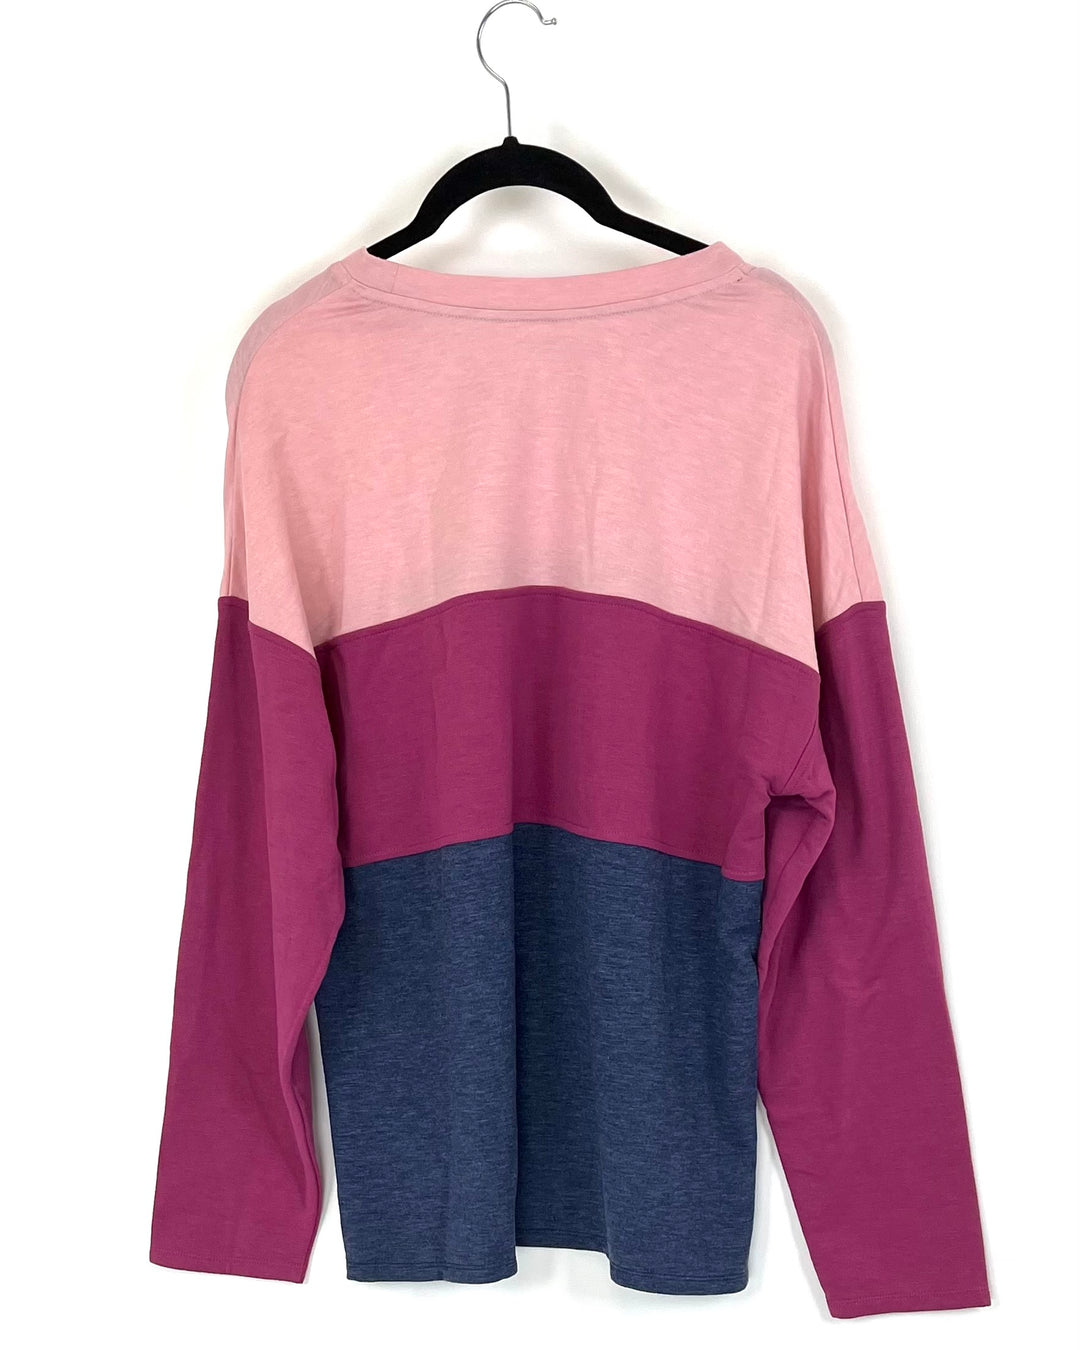 Pink And Navy Color Block Top - Size 4/6